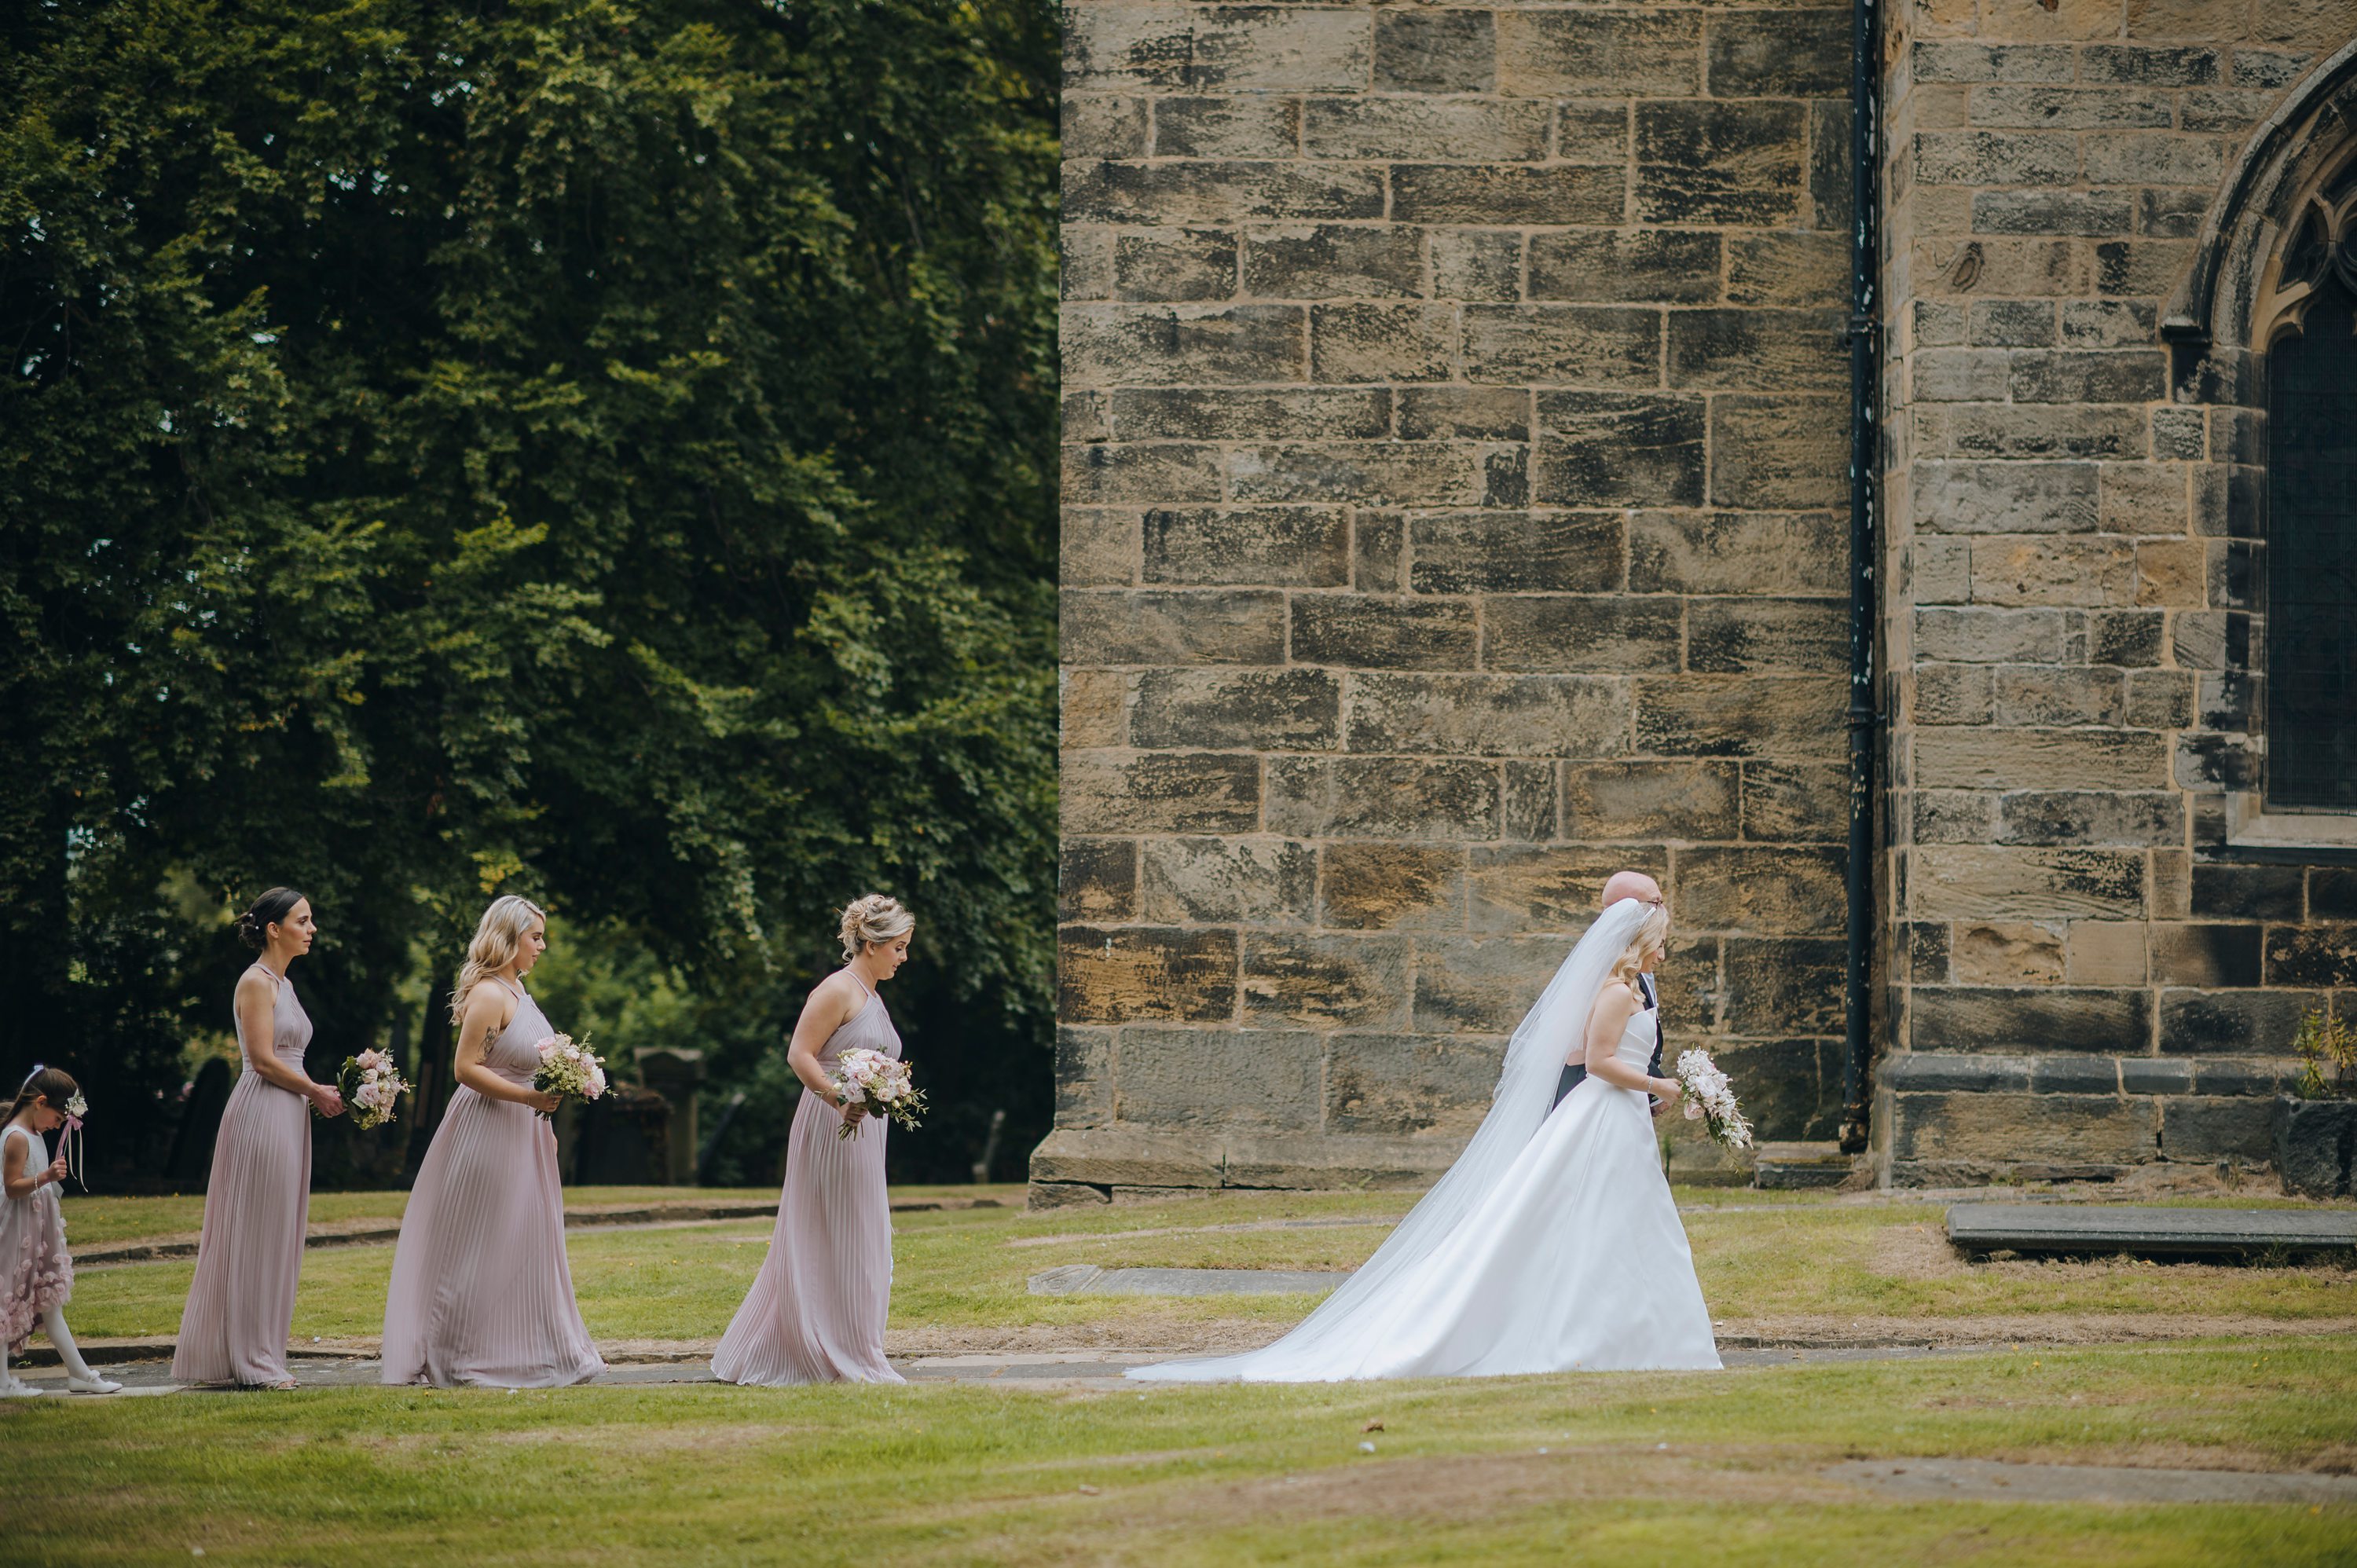 St Peter's Church, Tankersley wedding photo,bride and father walking to church on wedding day